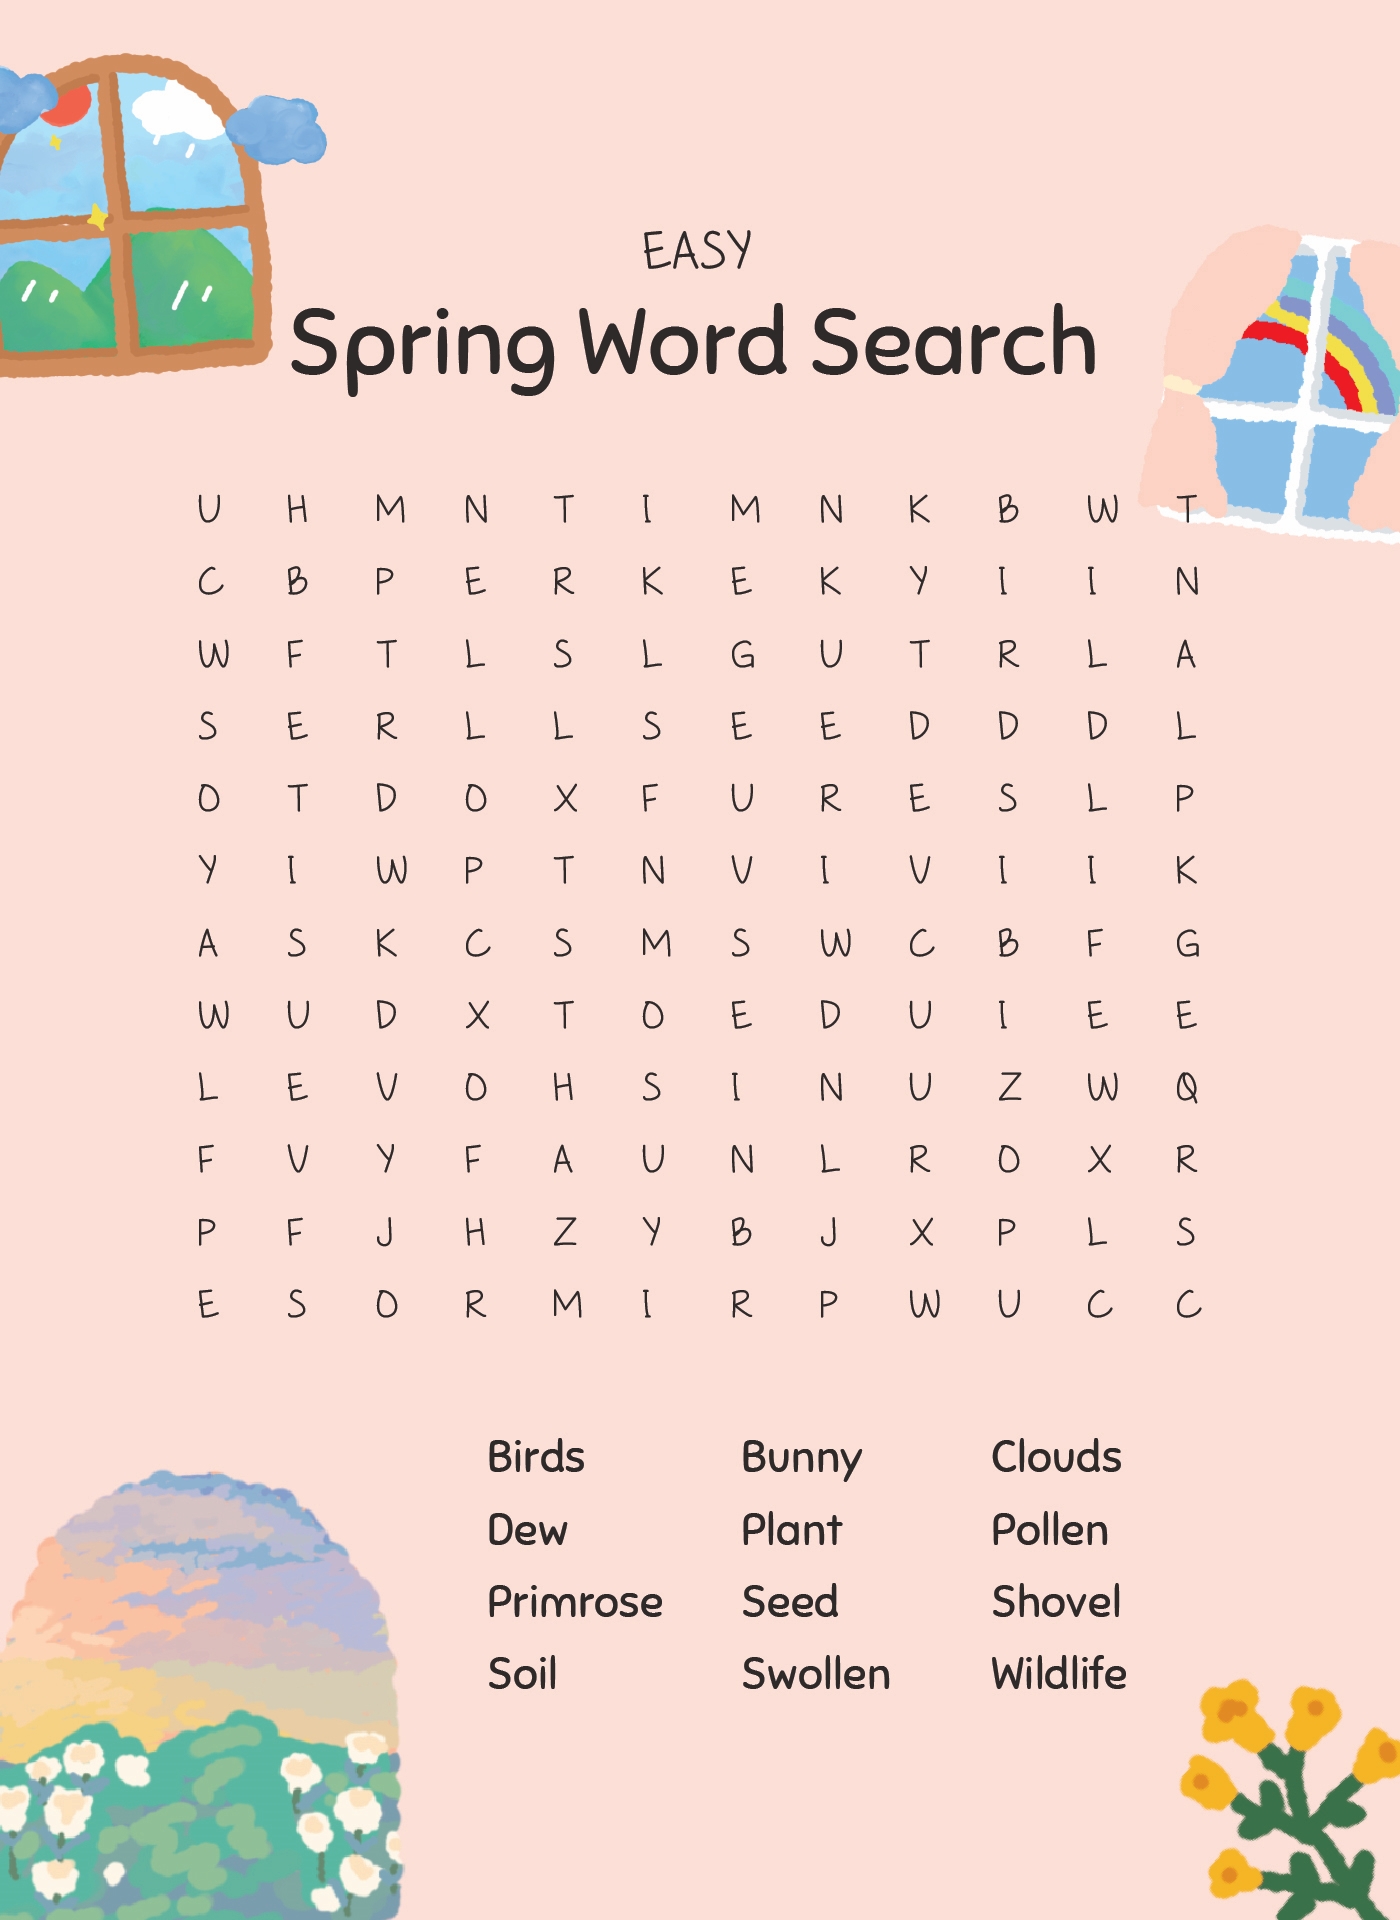 5-best-images-of-easy-spring-word-search-printables-printable-spring